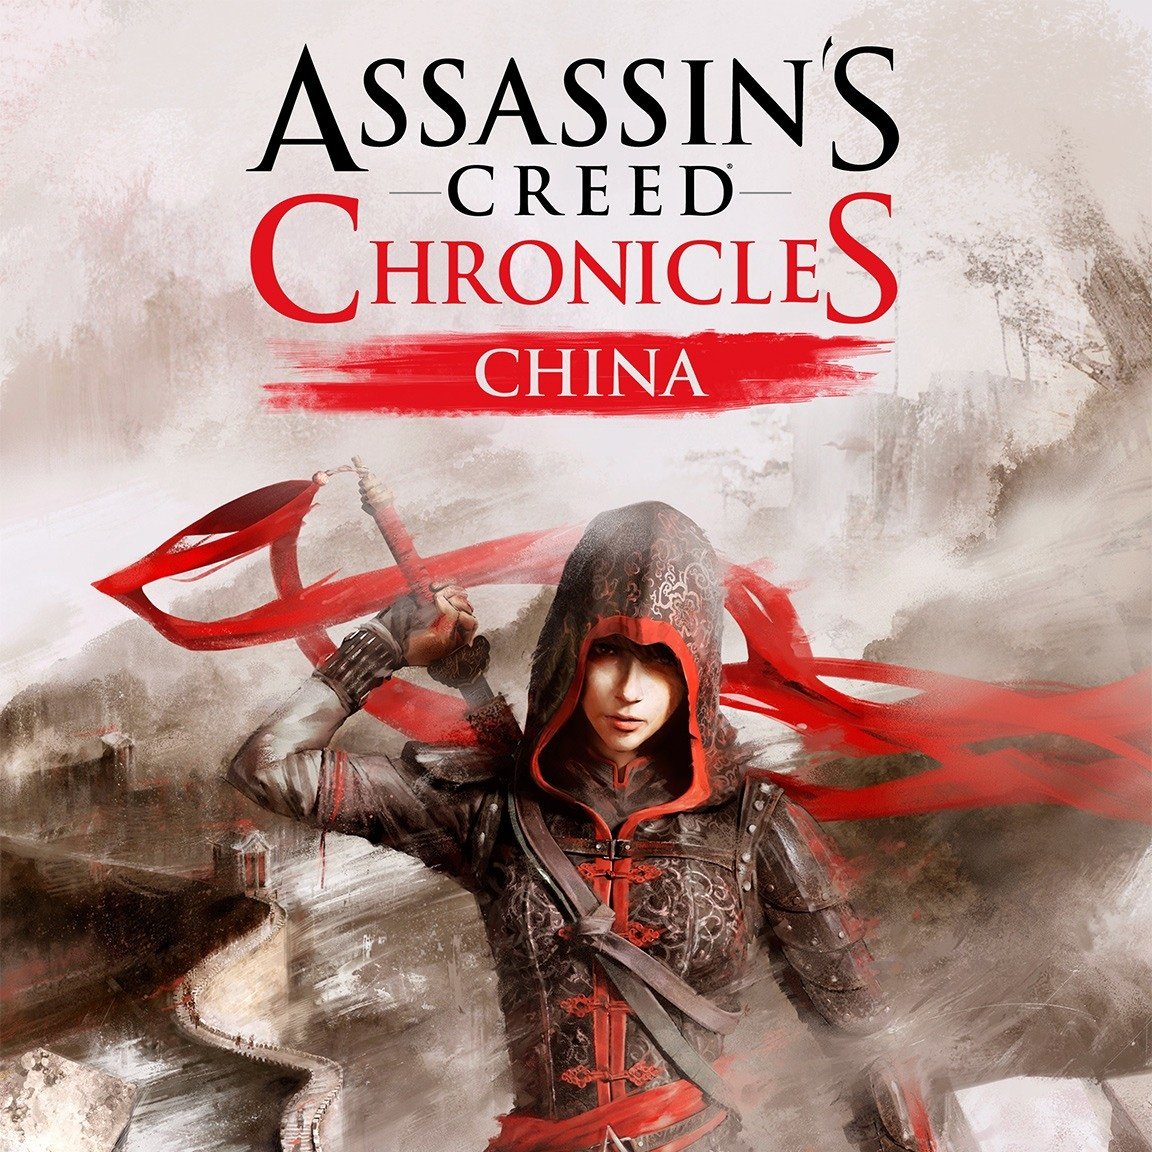 Assassins creed chronicles steam фото 105